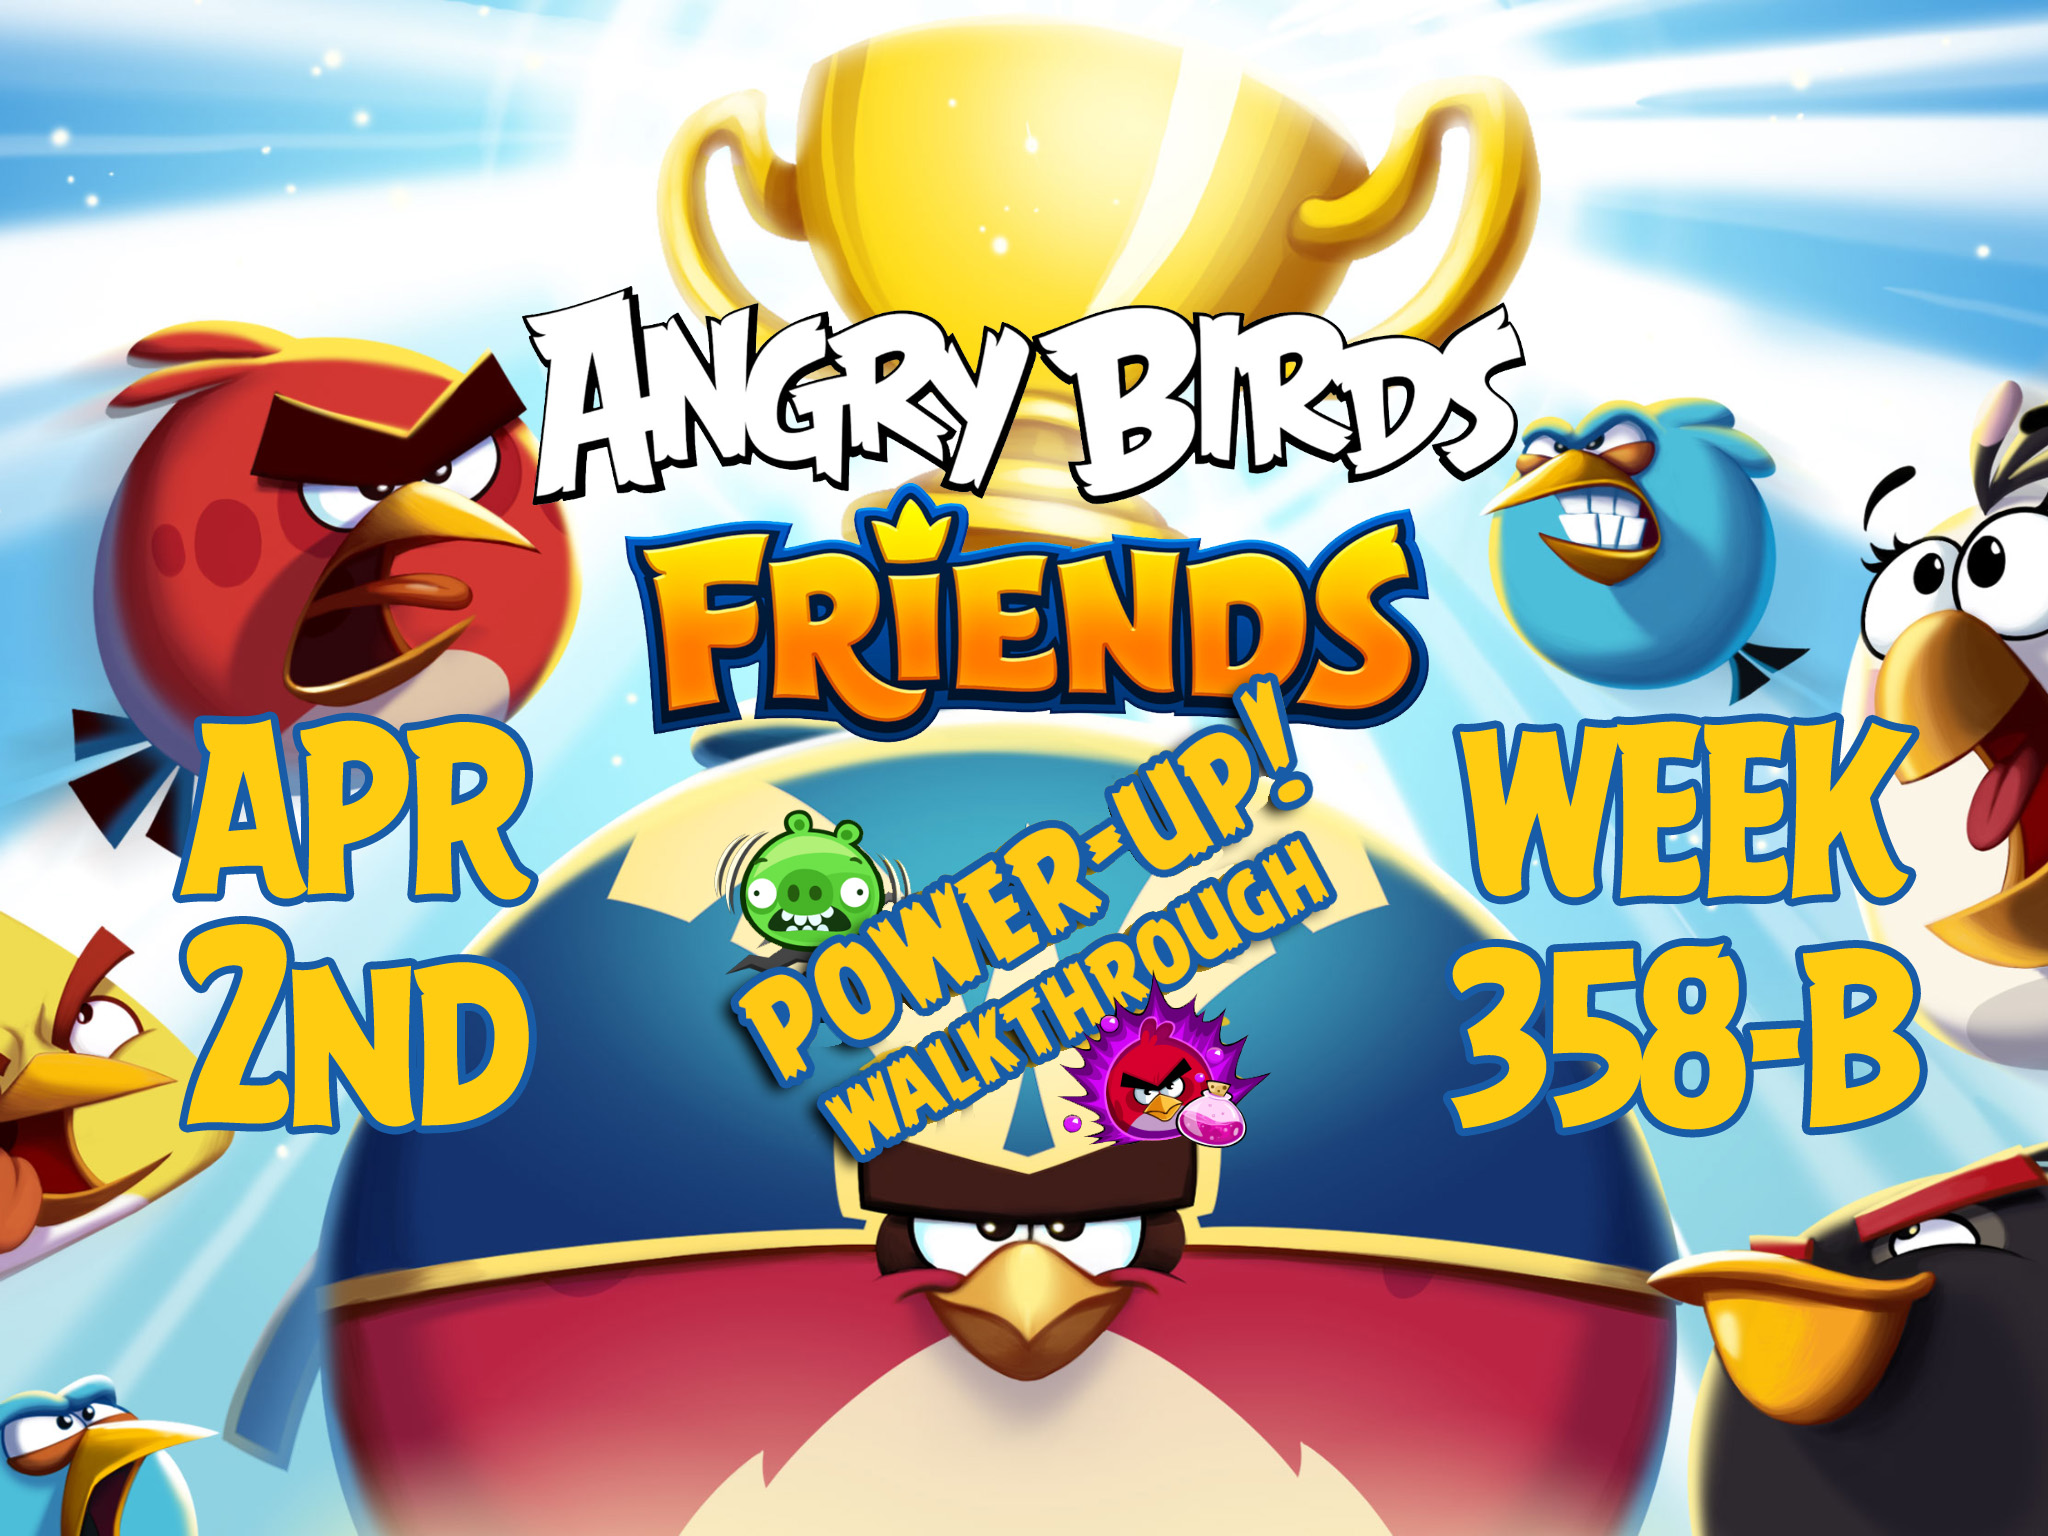 Angry-Birds-Friends-Tournament-Week-358-B-Feature-Image-PU